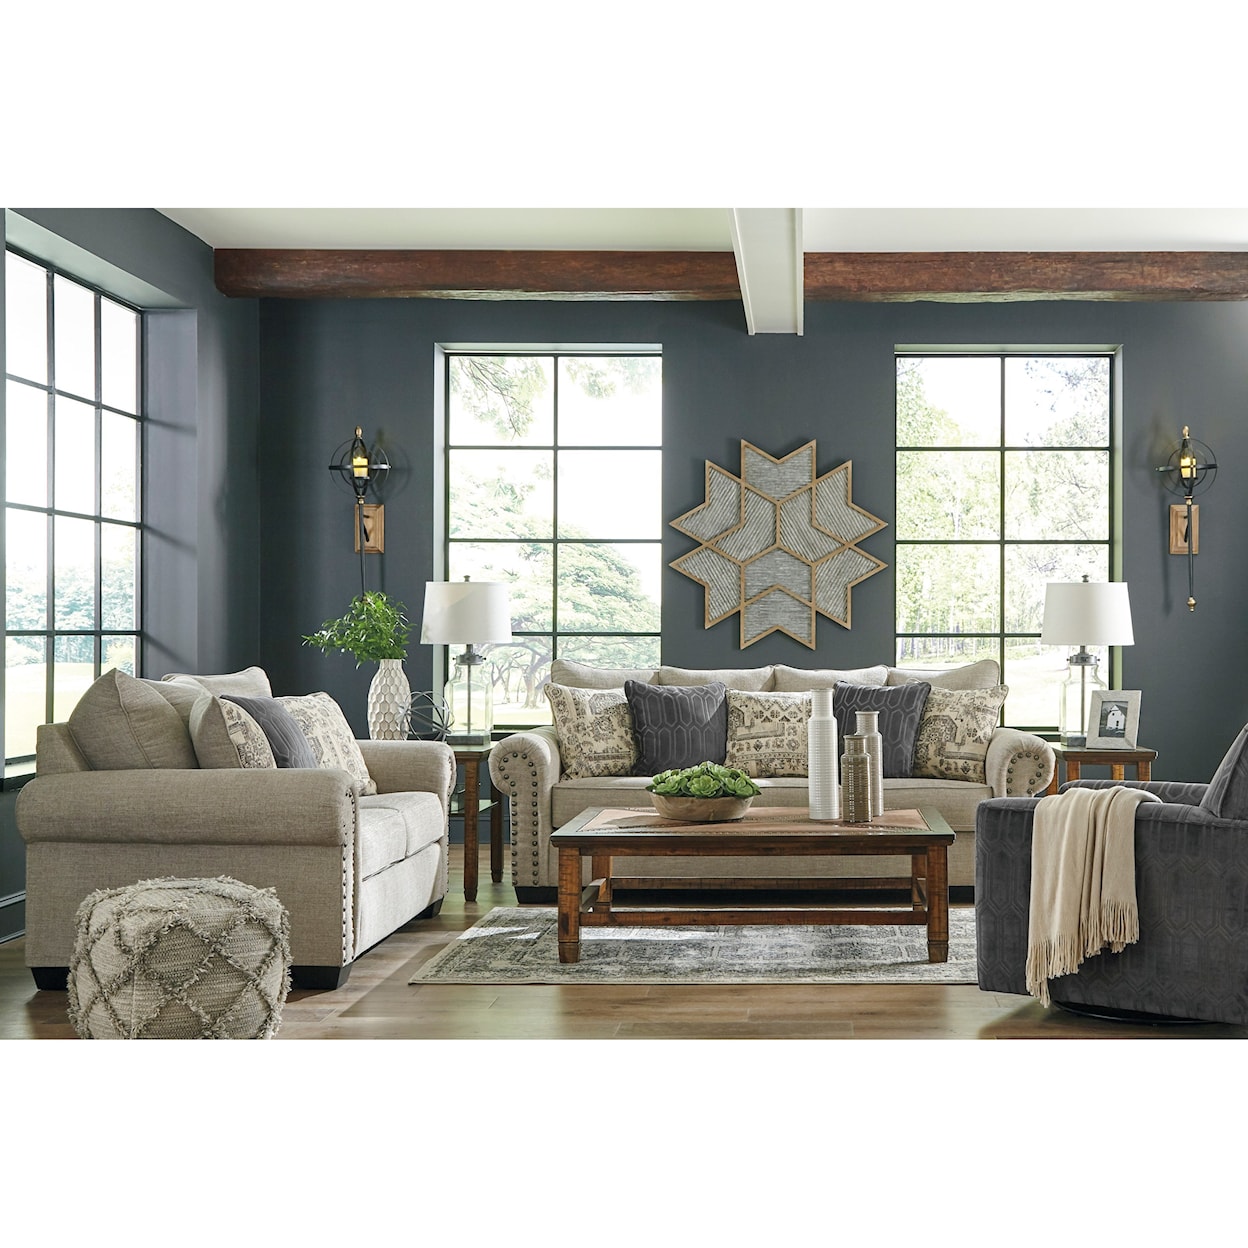 Signature Design by Ashley Zarina 3pc living room group